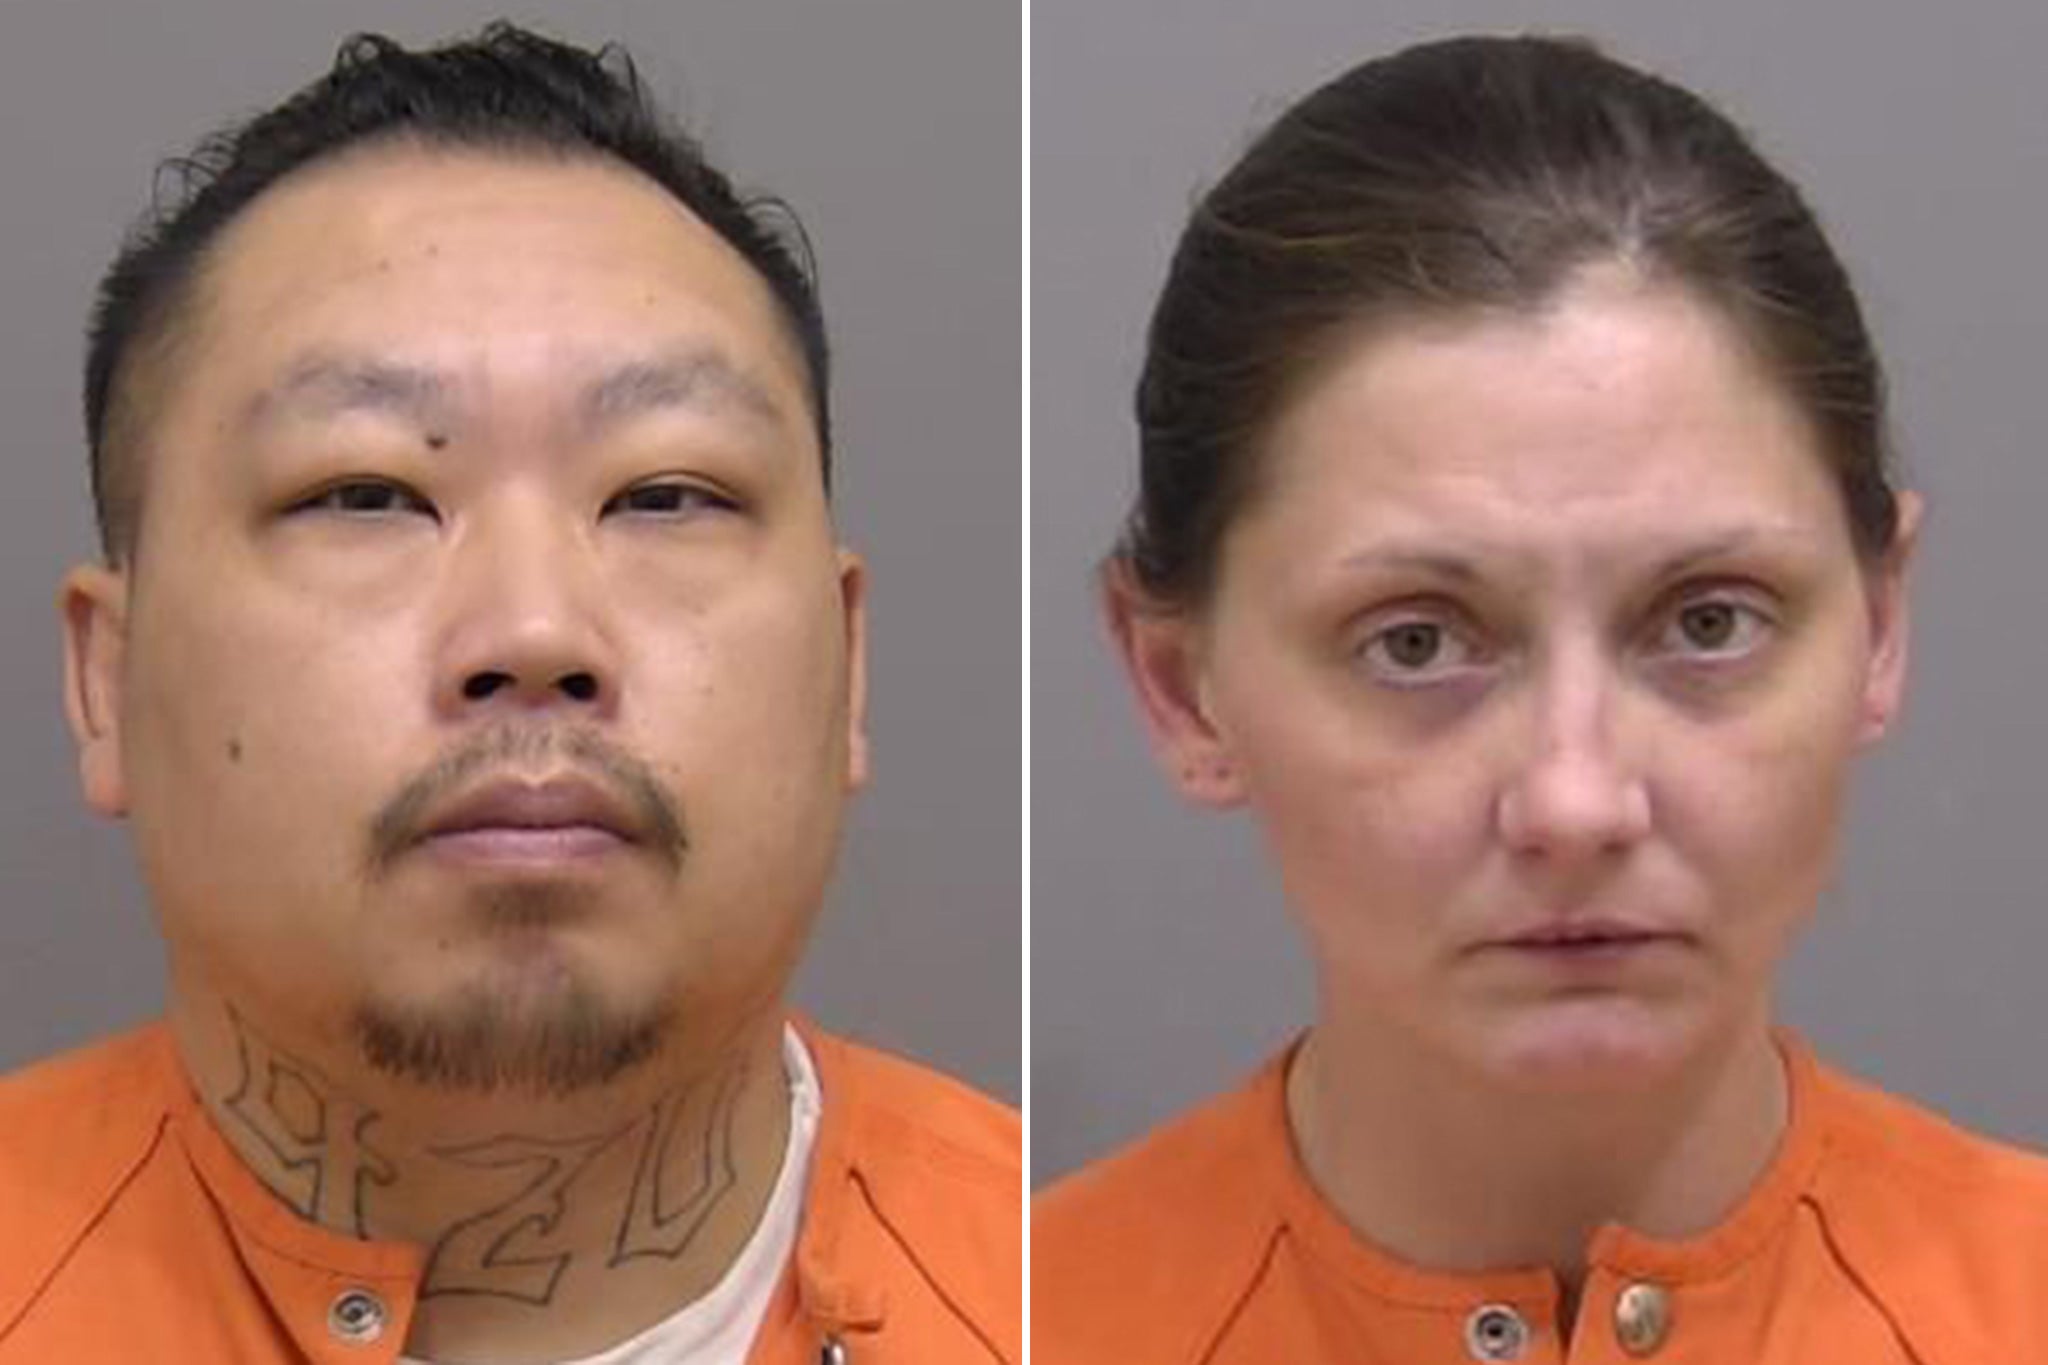 Jesse Vang and Katrina Baur both face chronic child neglect charges